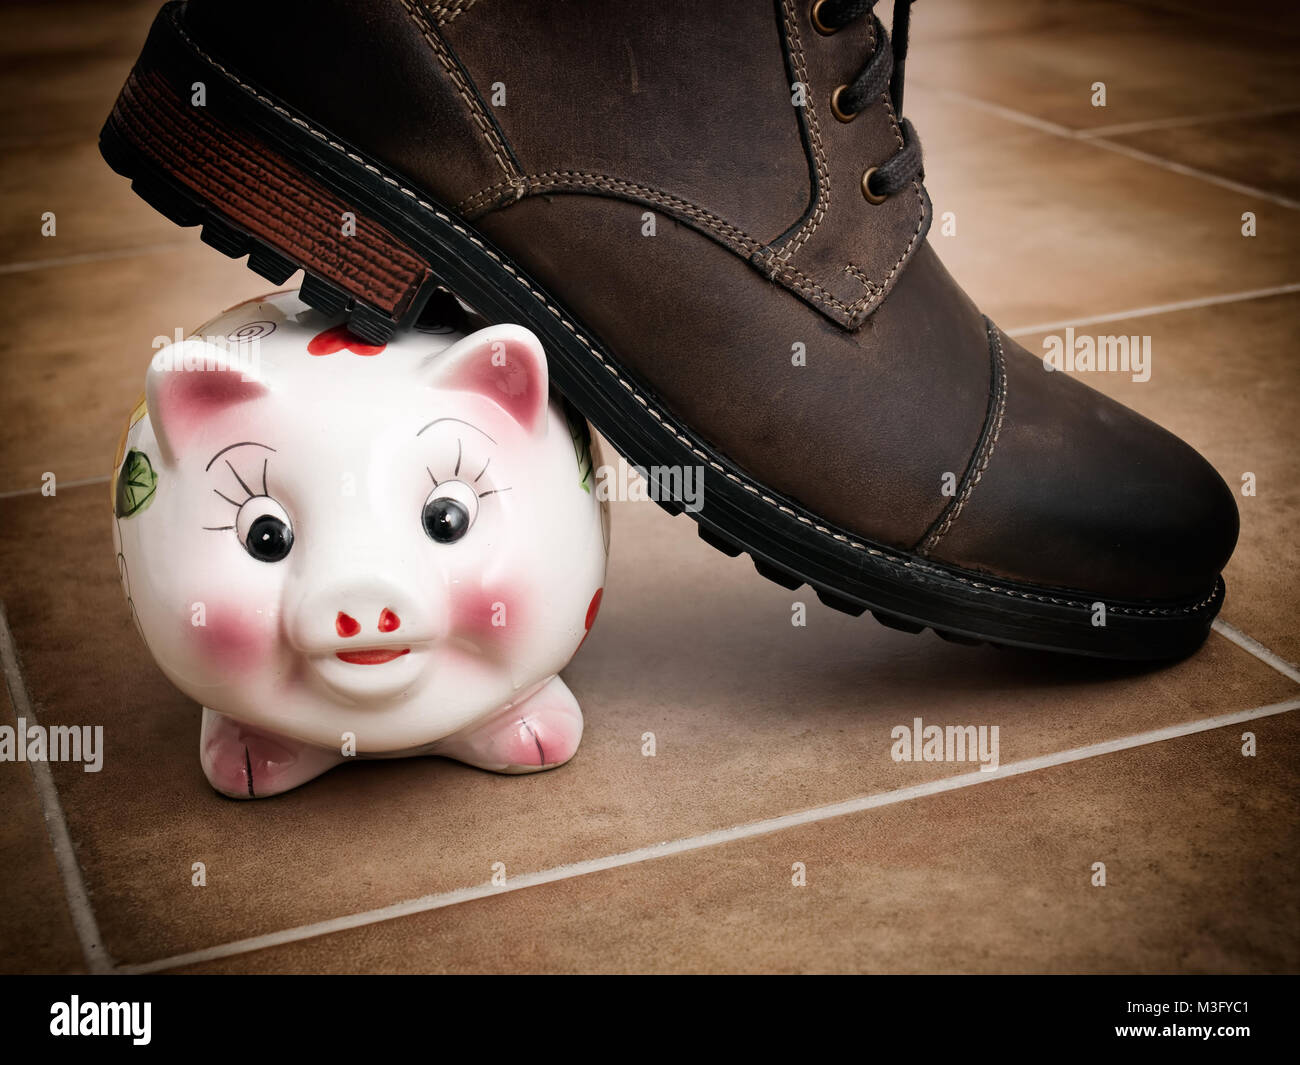 A shoe treads piggy bank as a metaphor about savings problems. Stock Photo